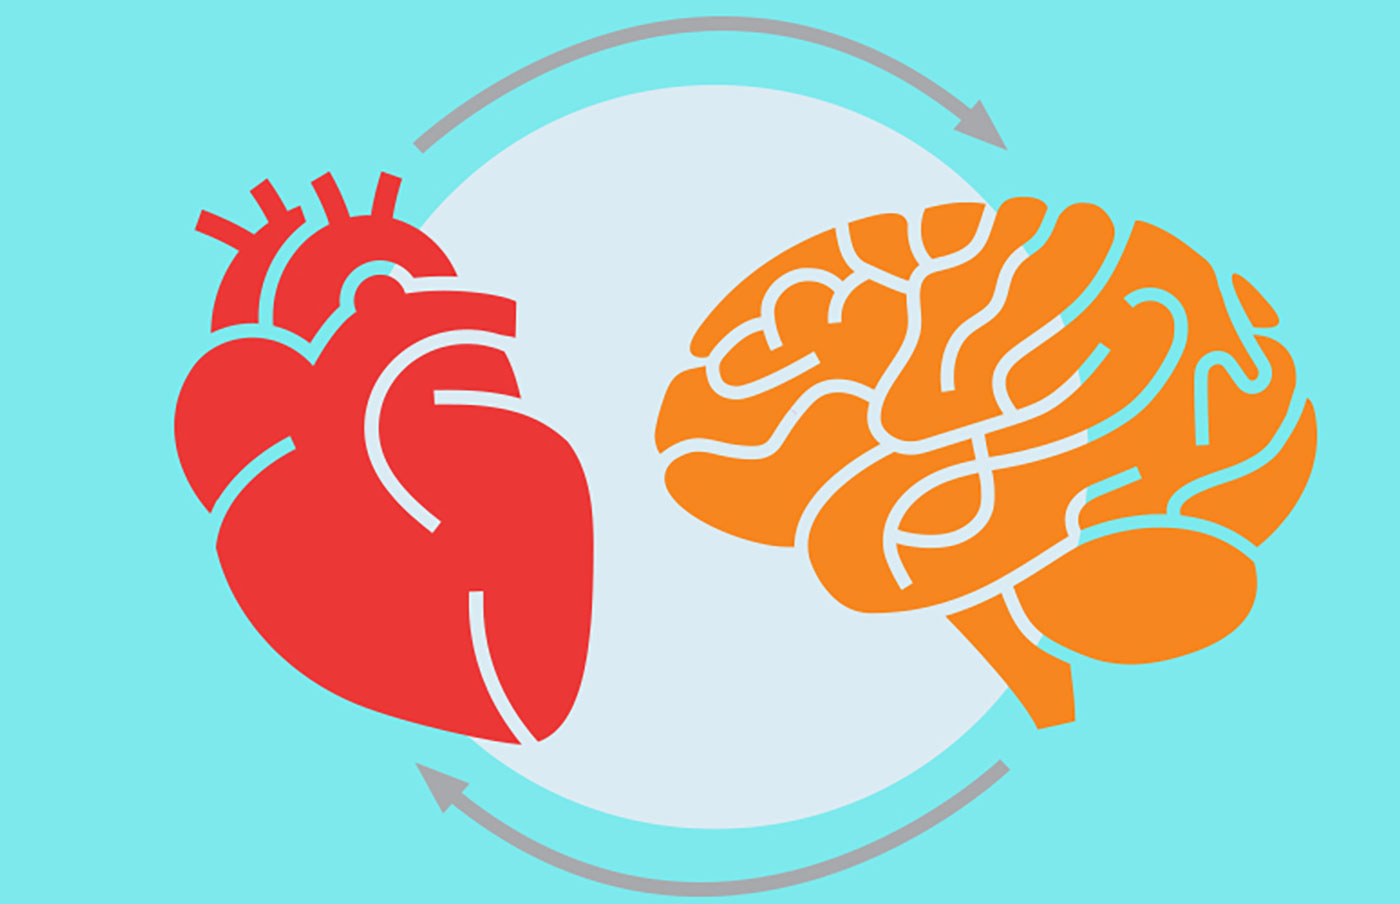 New Study Shows Taking Care Of Your Heart Helps Your Brain Health